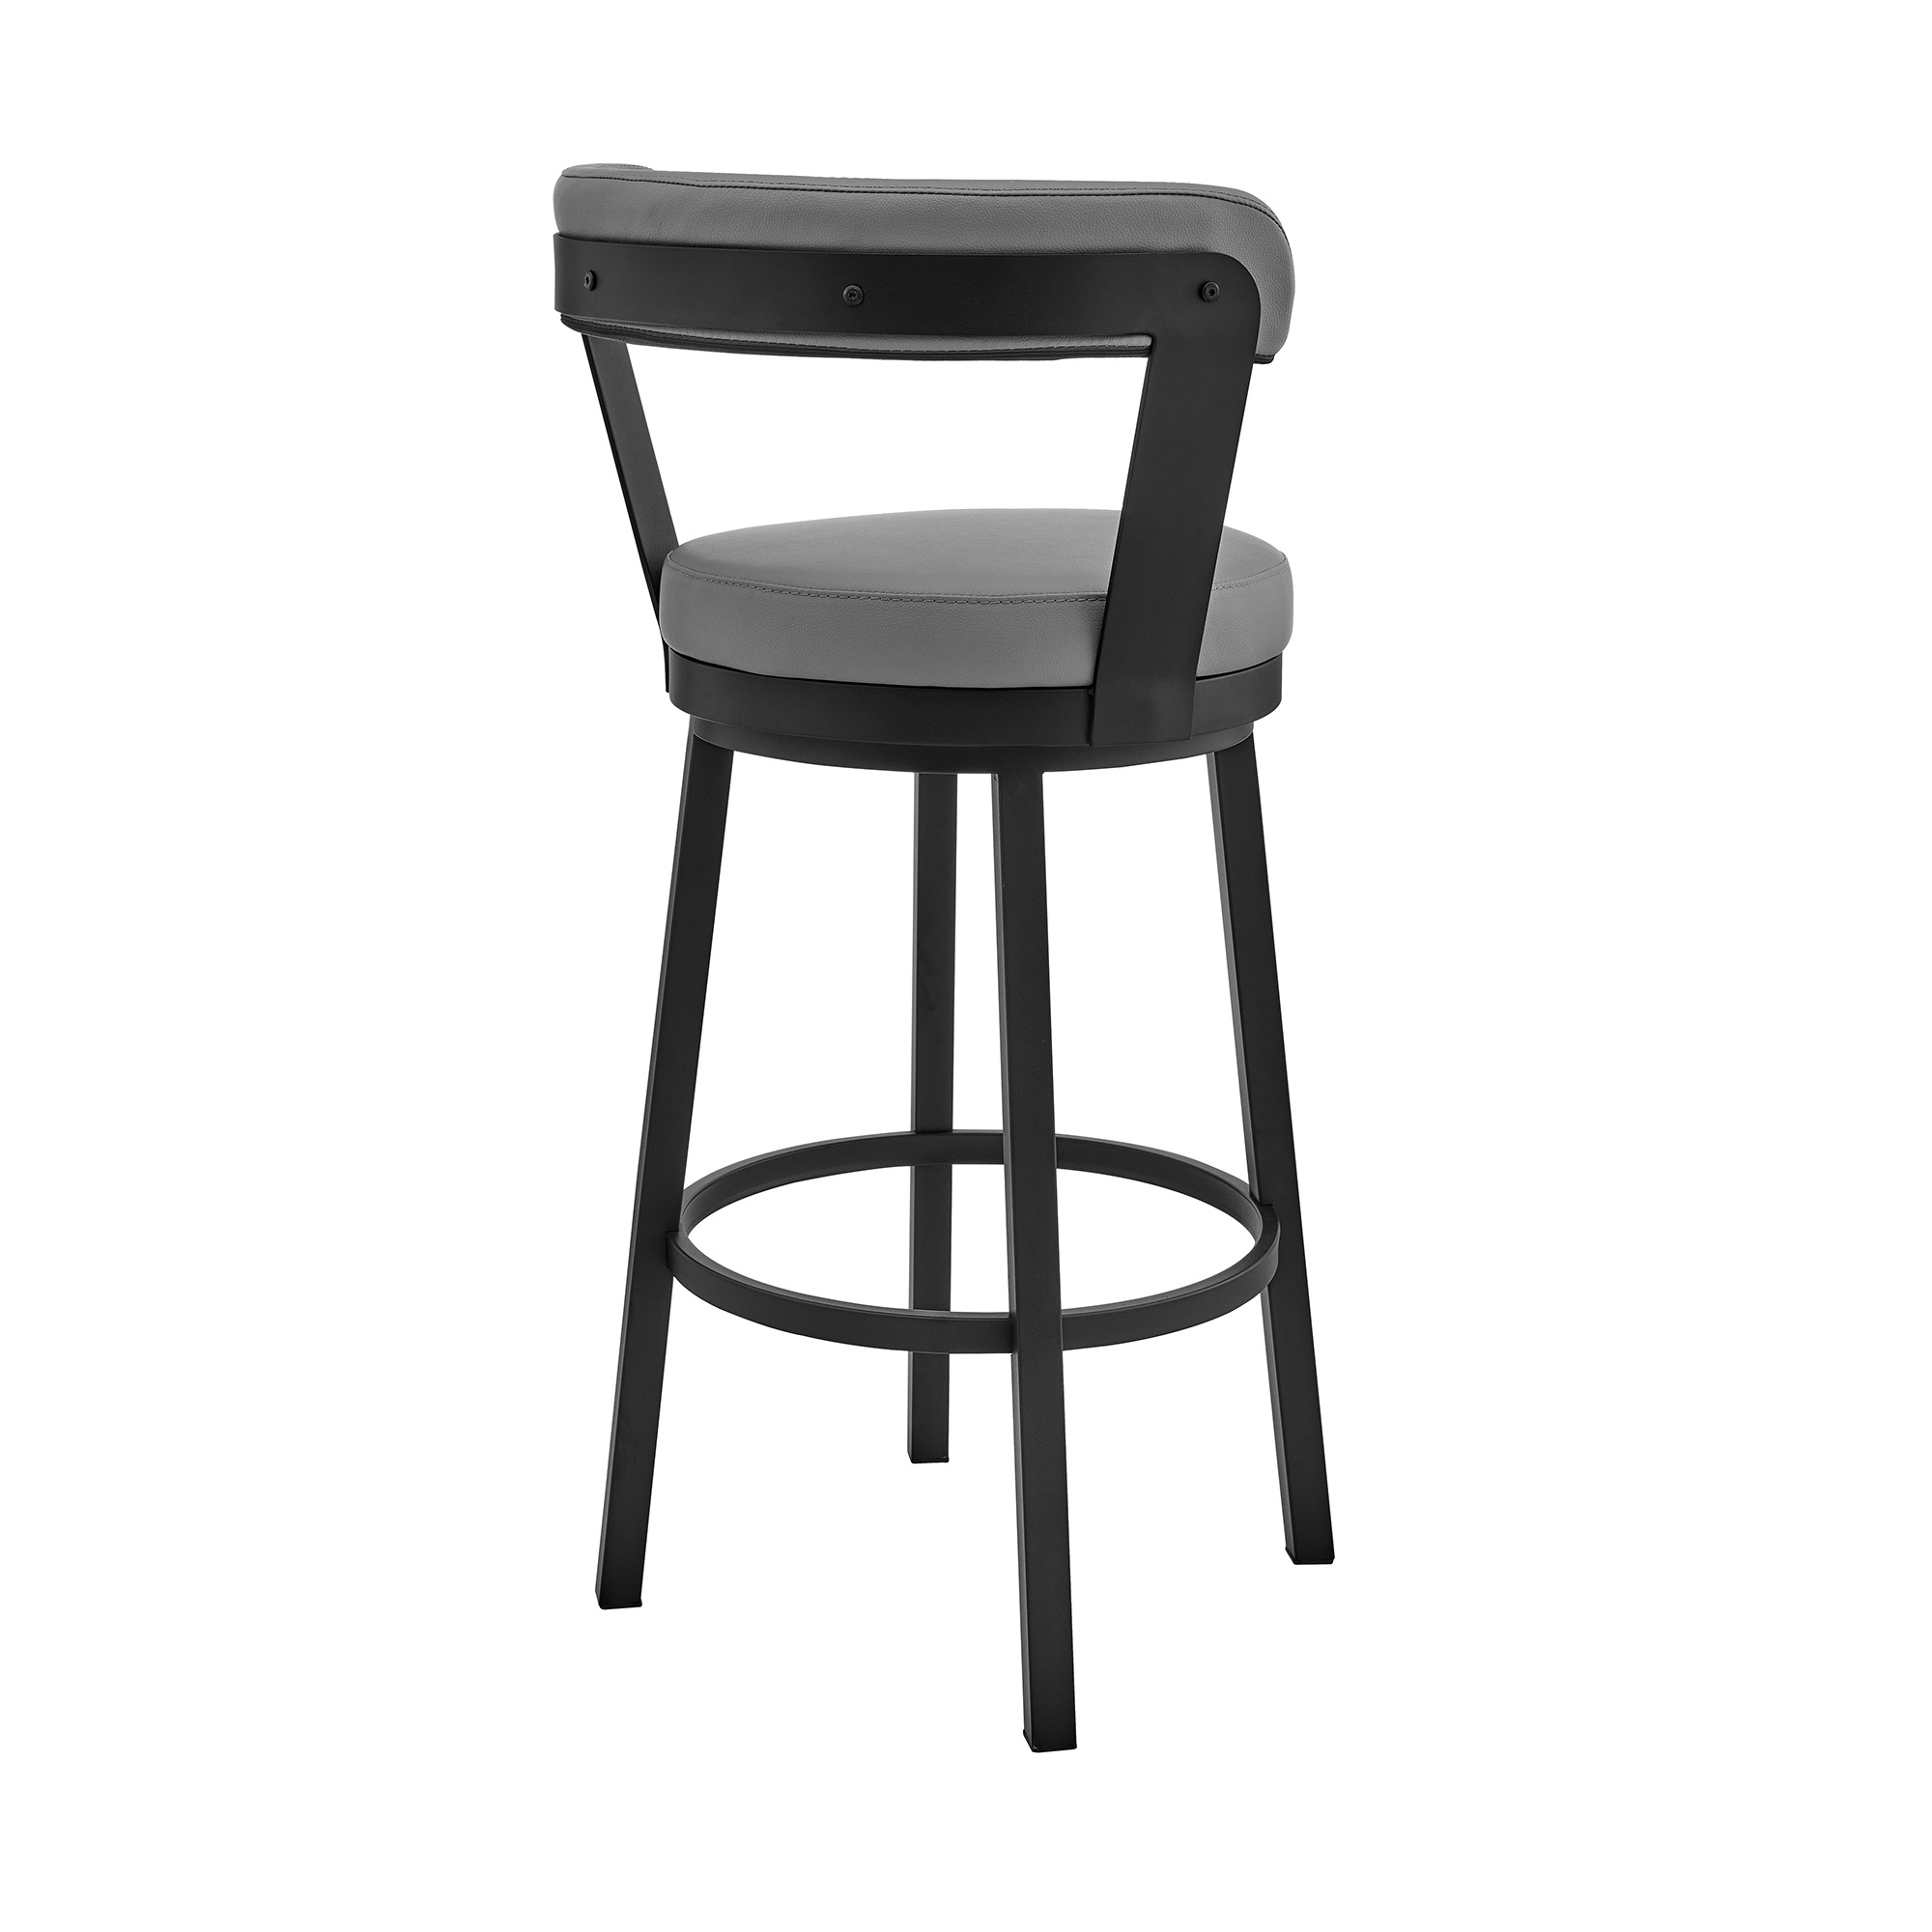 Armen Living Bryant 26" Counter Height Swivel Bar Stool in Black Finish and Gray Faux Leather